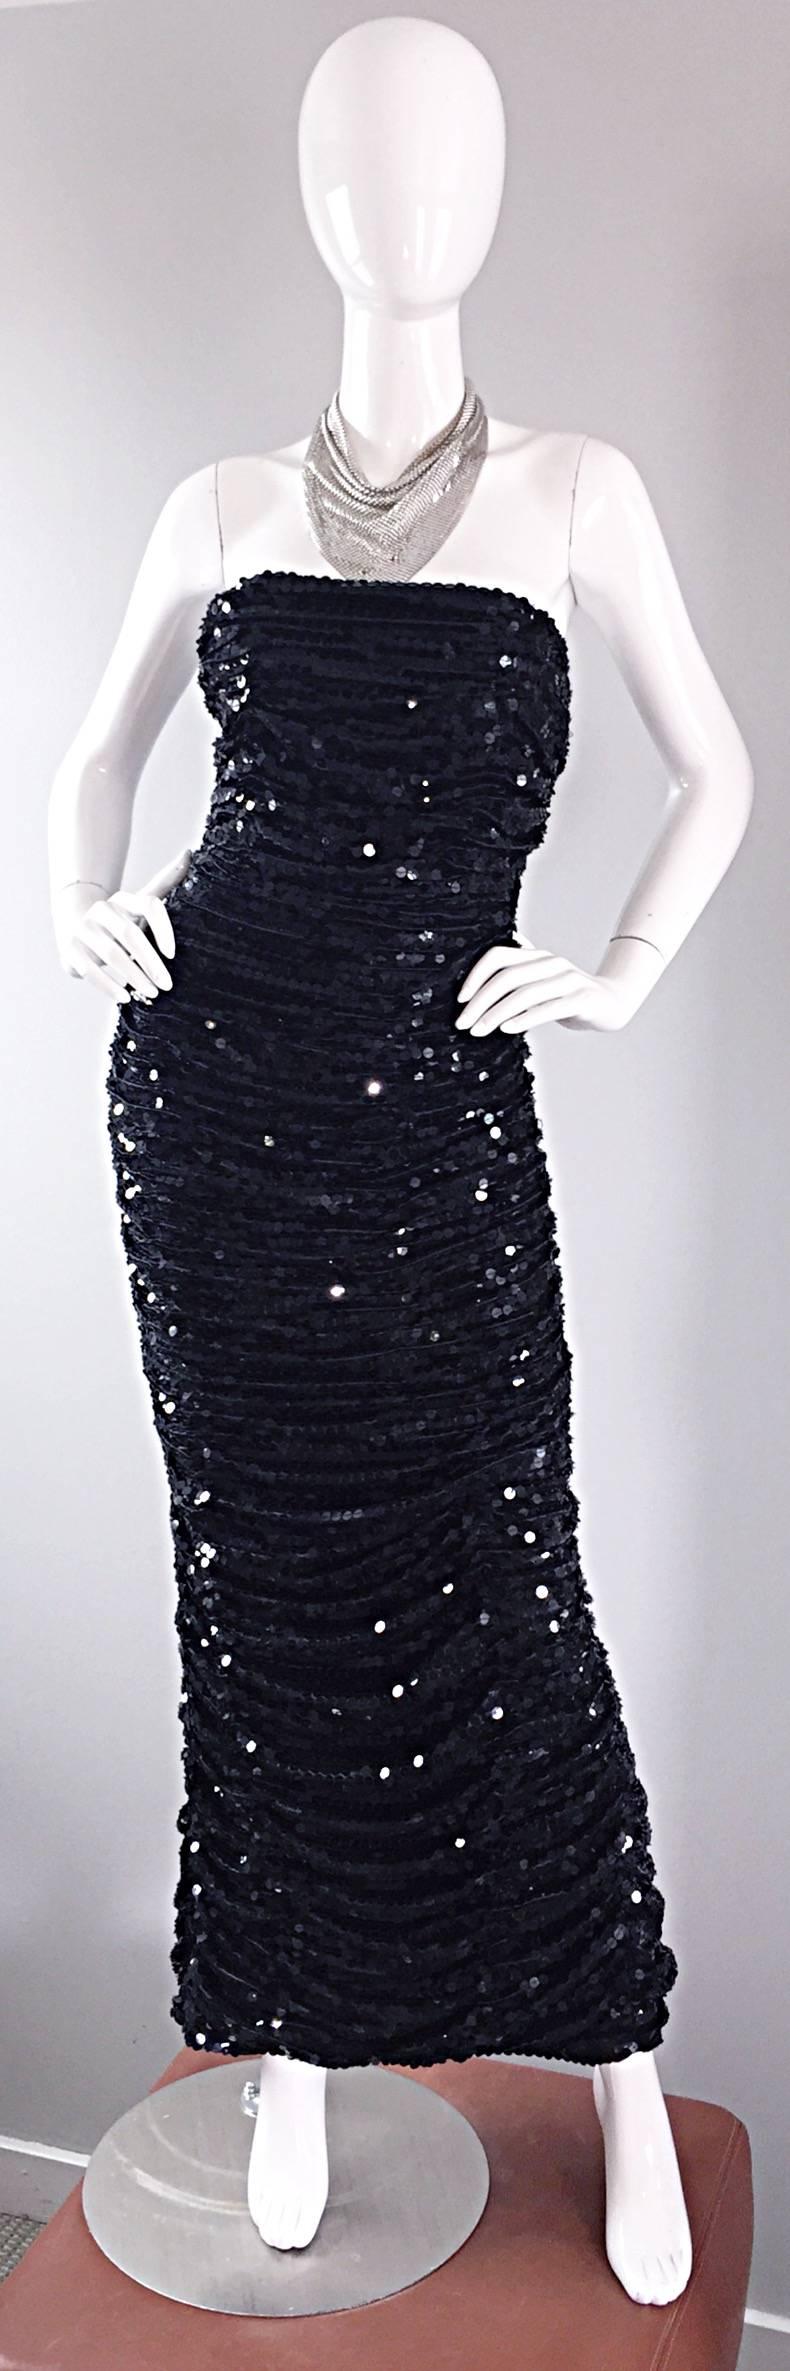 Stunning vintage OLEG CASSINI black strapless sequined evening dress! Features thousands of hand-sewn sequins throughout the entire dress. Flattering ruching detail that Cassini was known for. Simply sensational on the body. Slit up the center back